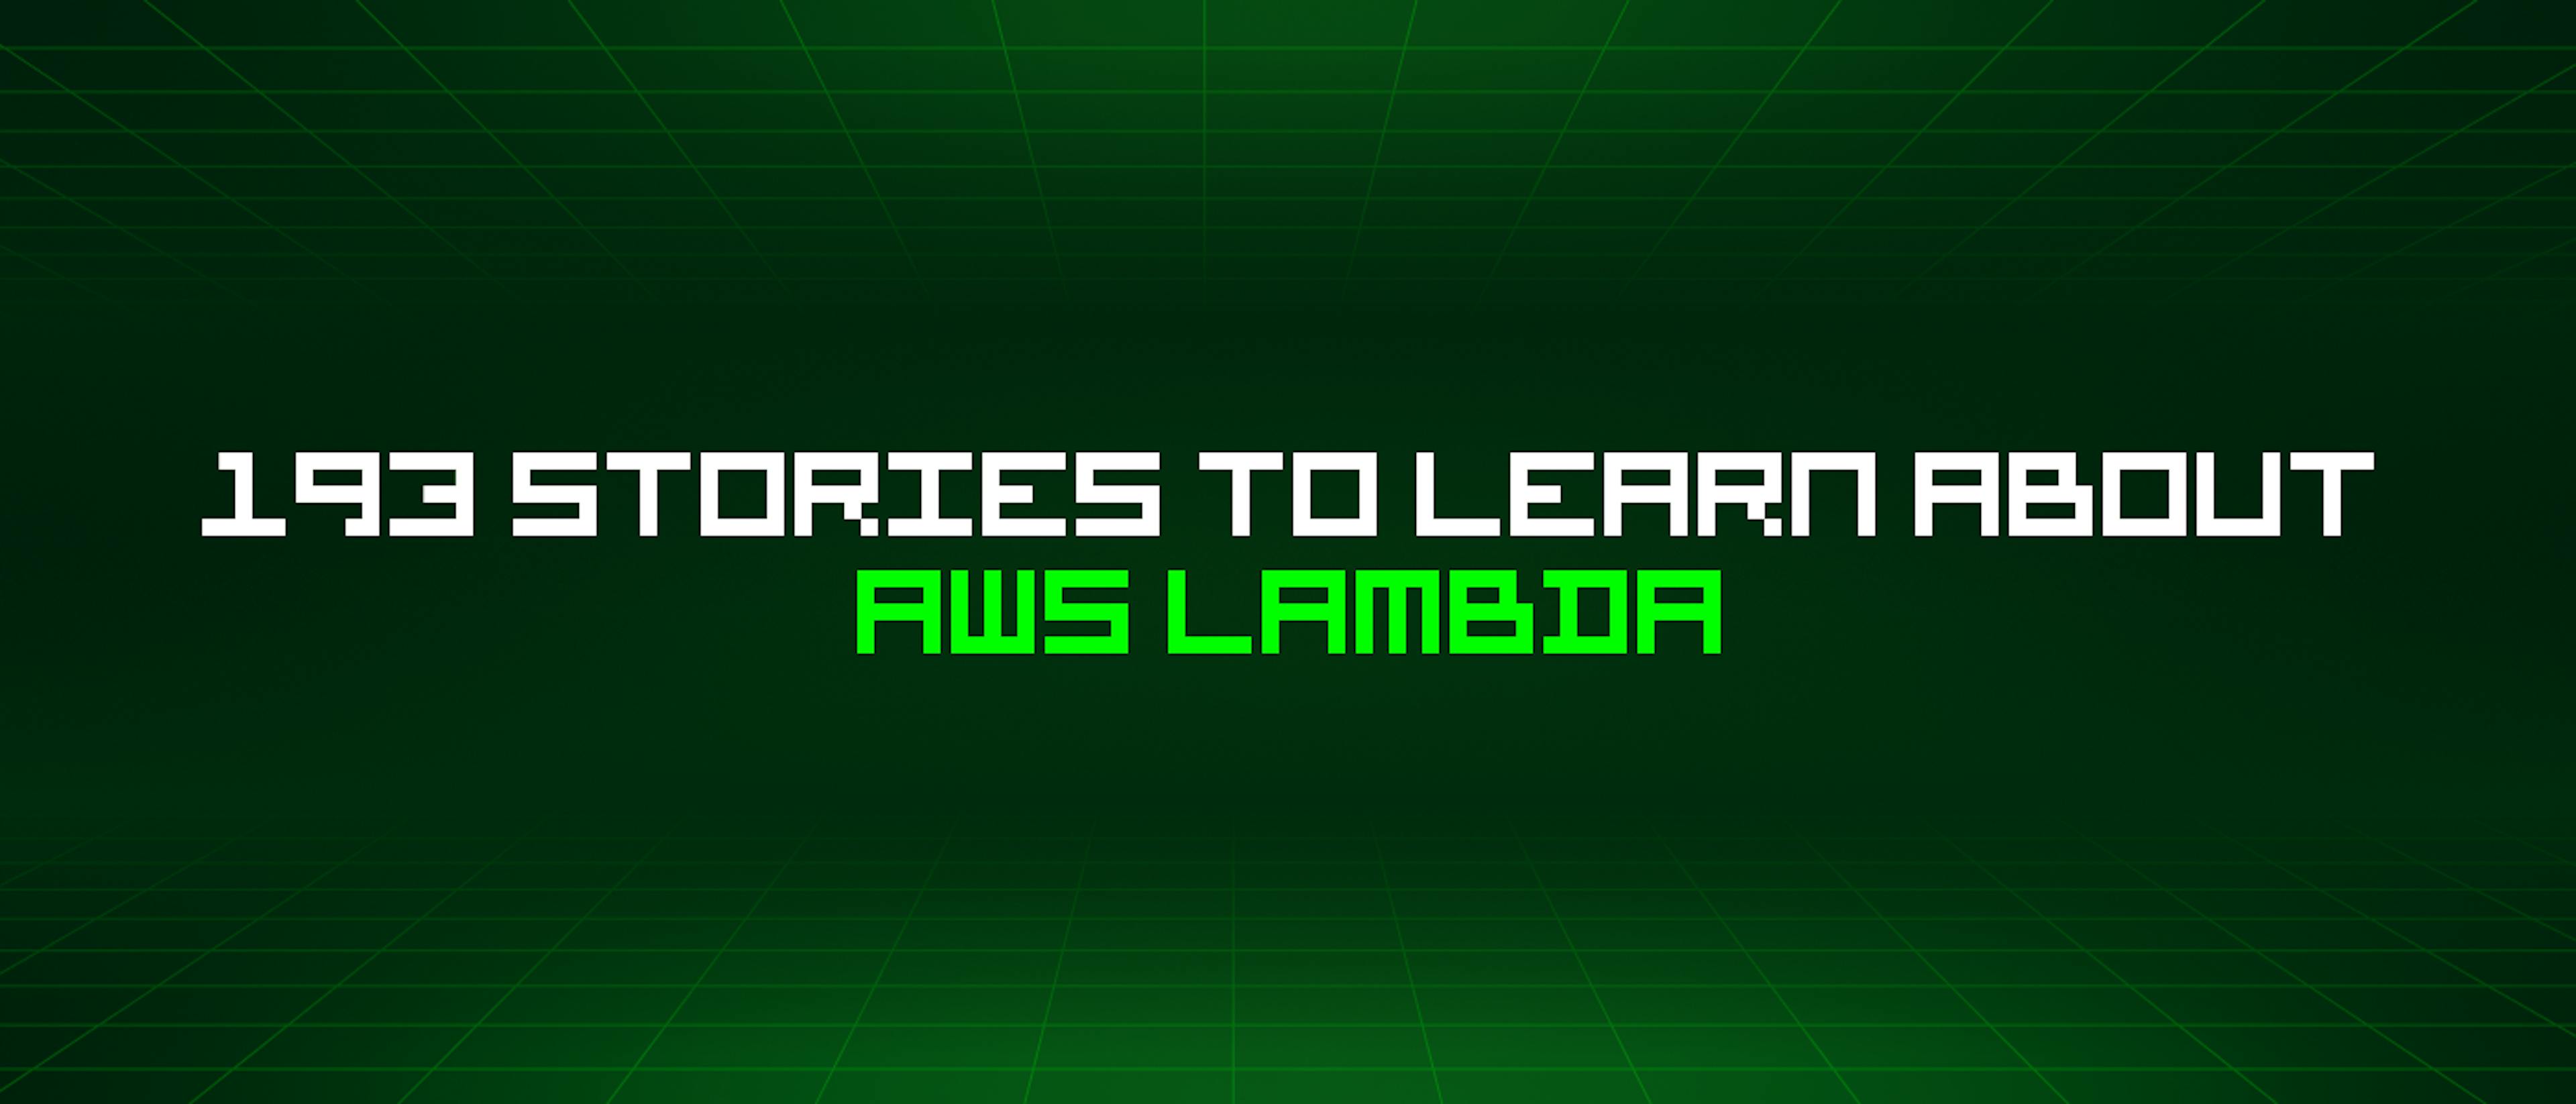 featured image - 193 Stories To Learn About AWS Lambda